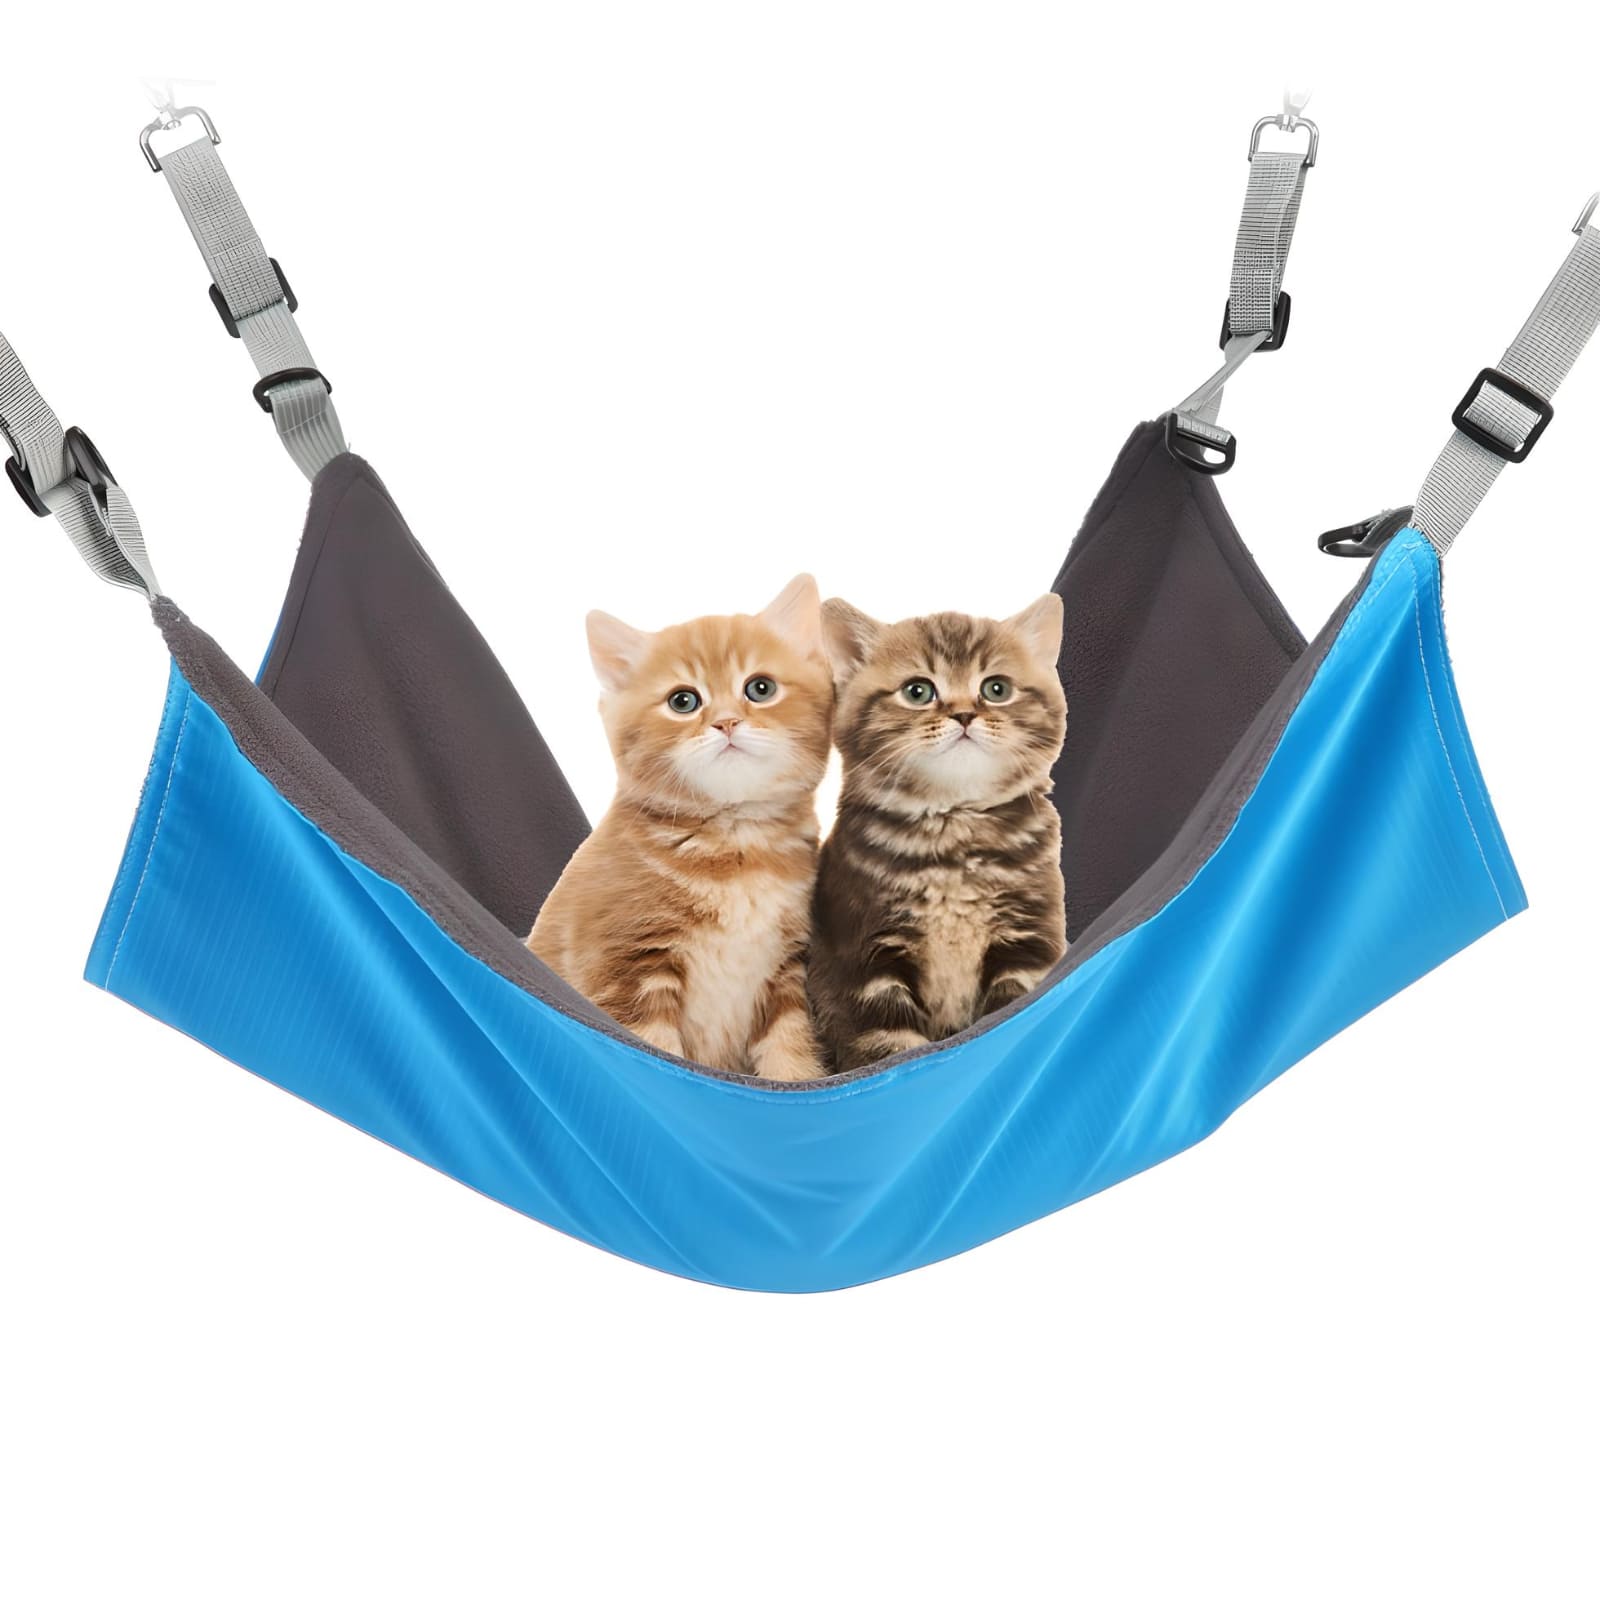 Copy-of-two-cats-sitting-in-a-hanging-pet-bed